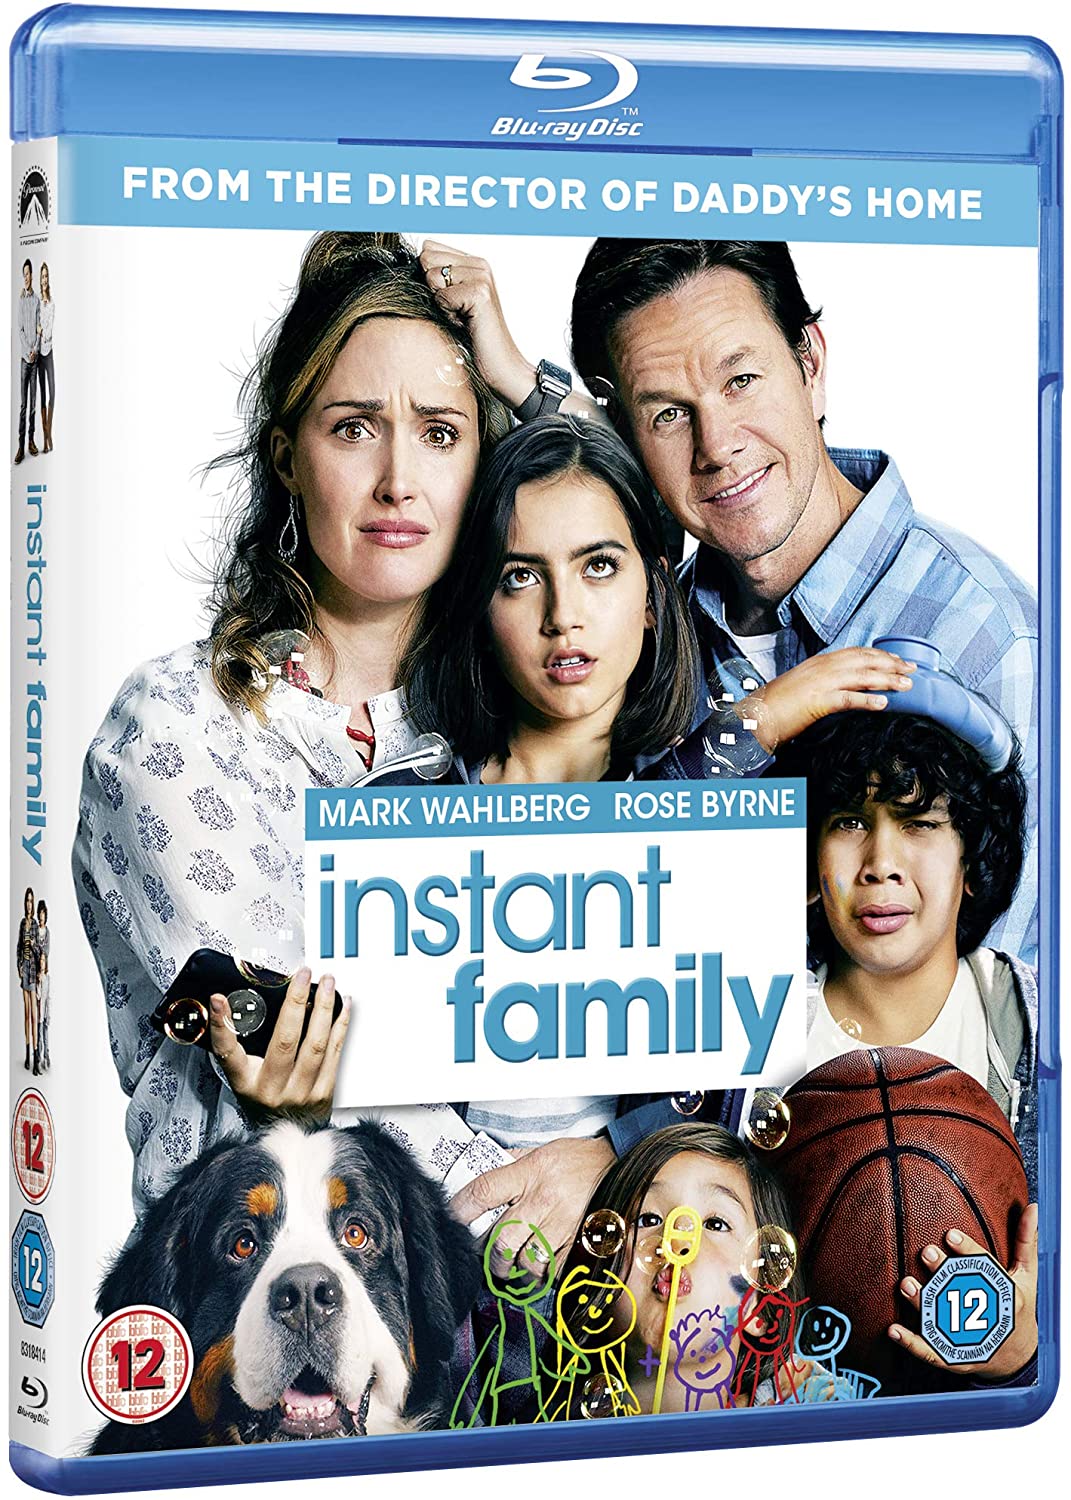 Instant Family -Comedy [Blu-ray]